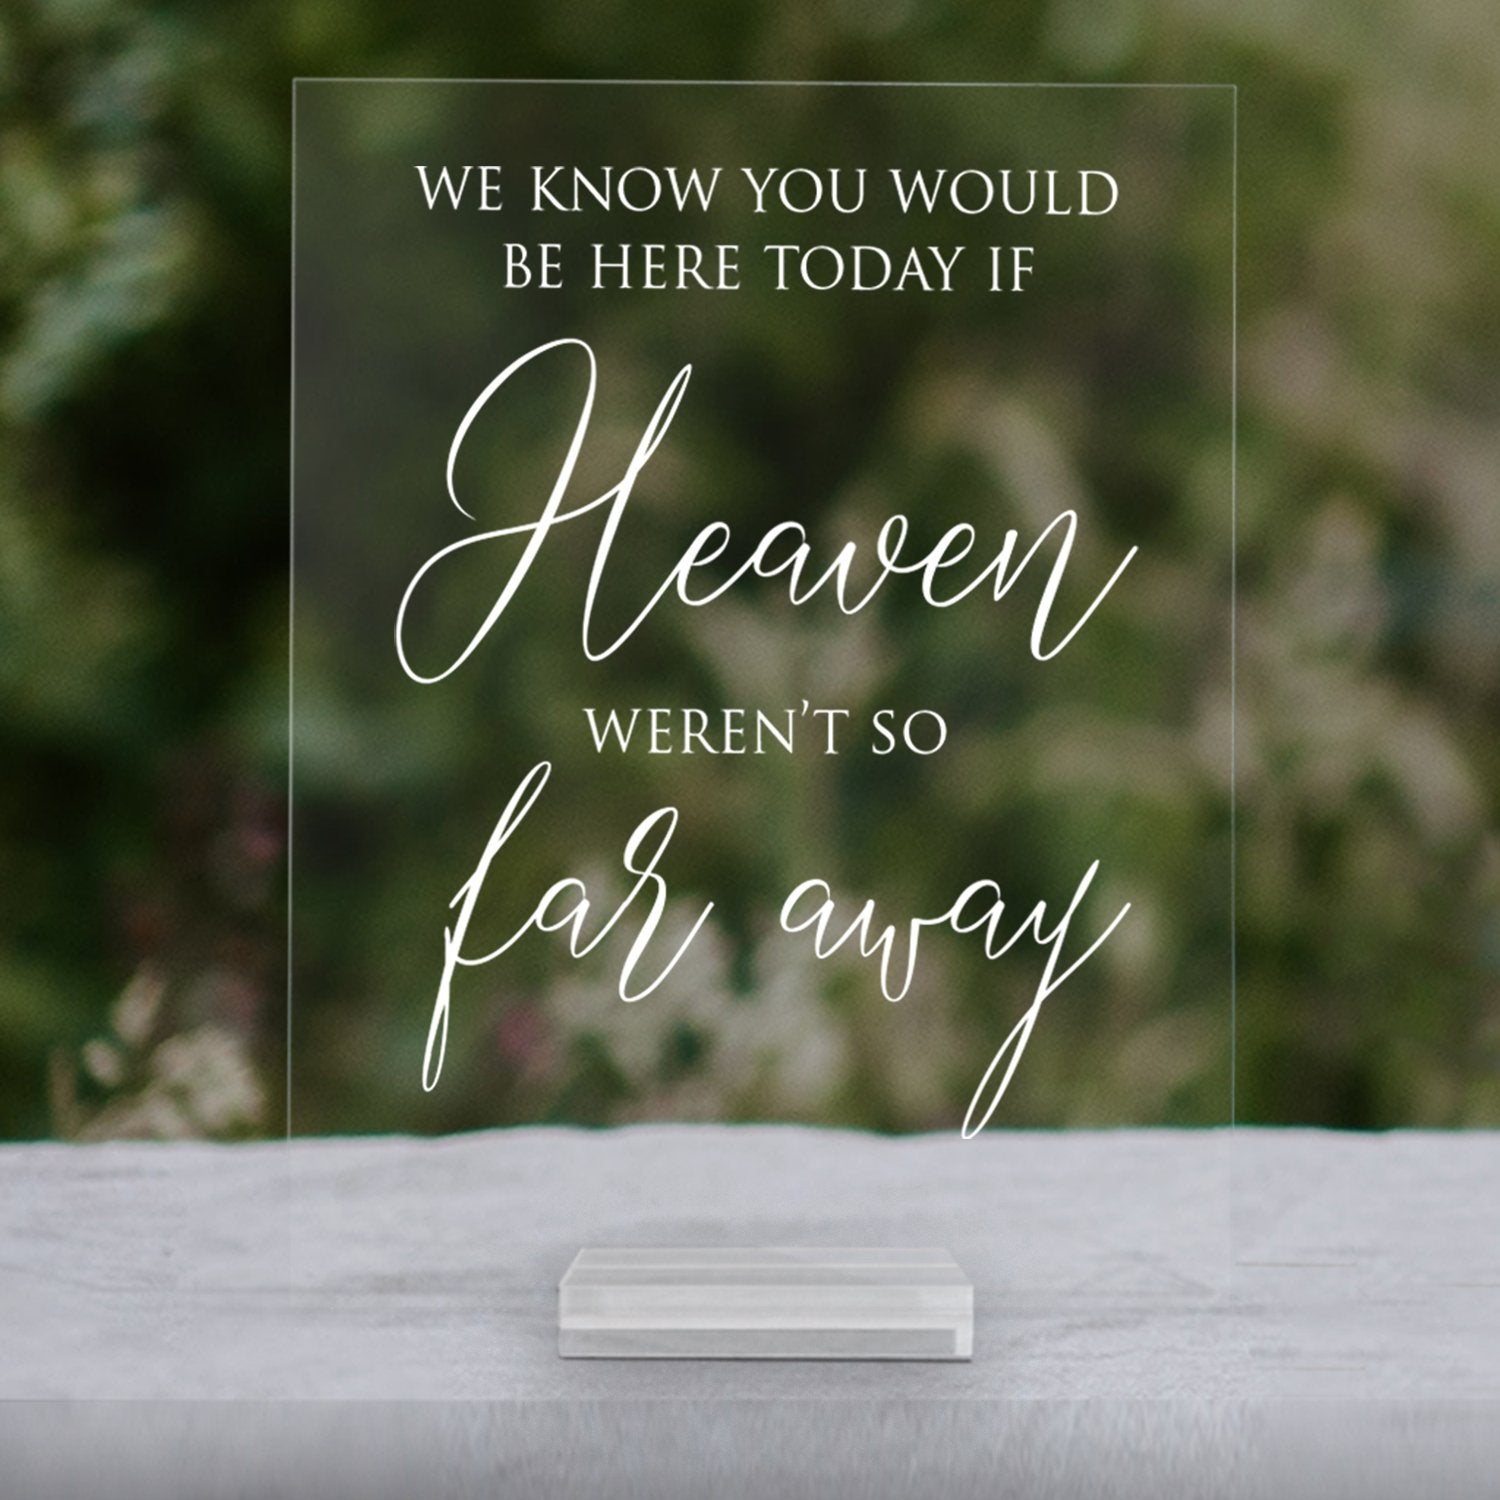 We Know You Would Be Here Today if Heaven Weren't So Far Away Acrylic Sign | Lucite In Loving Memory Sign | Wedding Decor | SCC-212 - SCC Signs